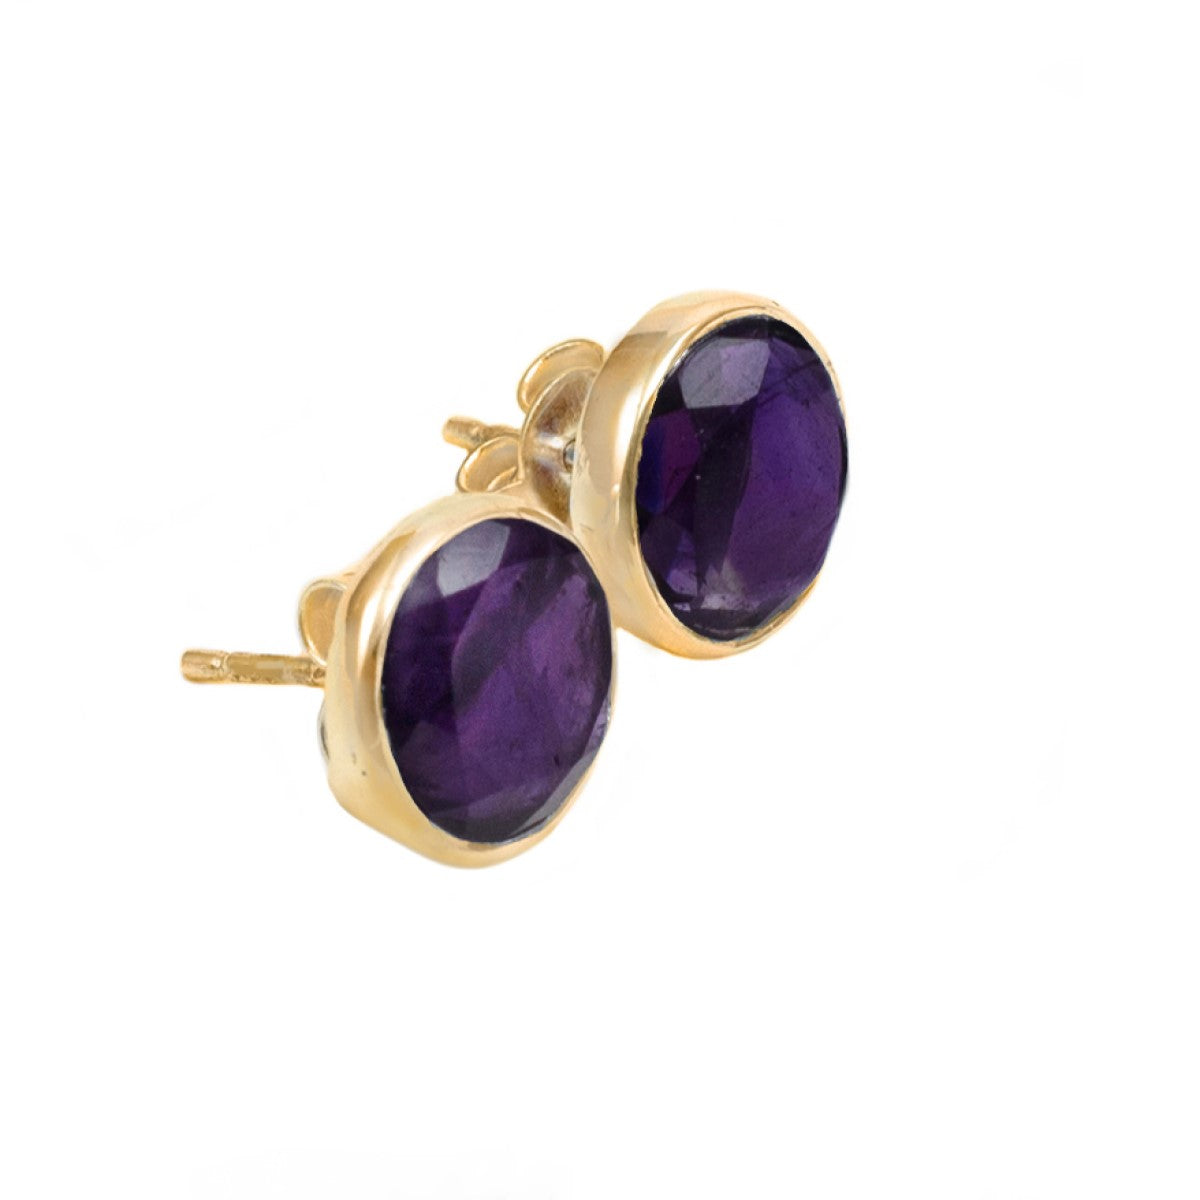 Amethyst Studs in Gold Plated Sterling Silver with a Round Faceted Gemstone